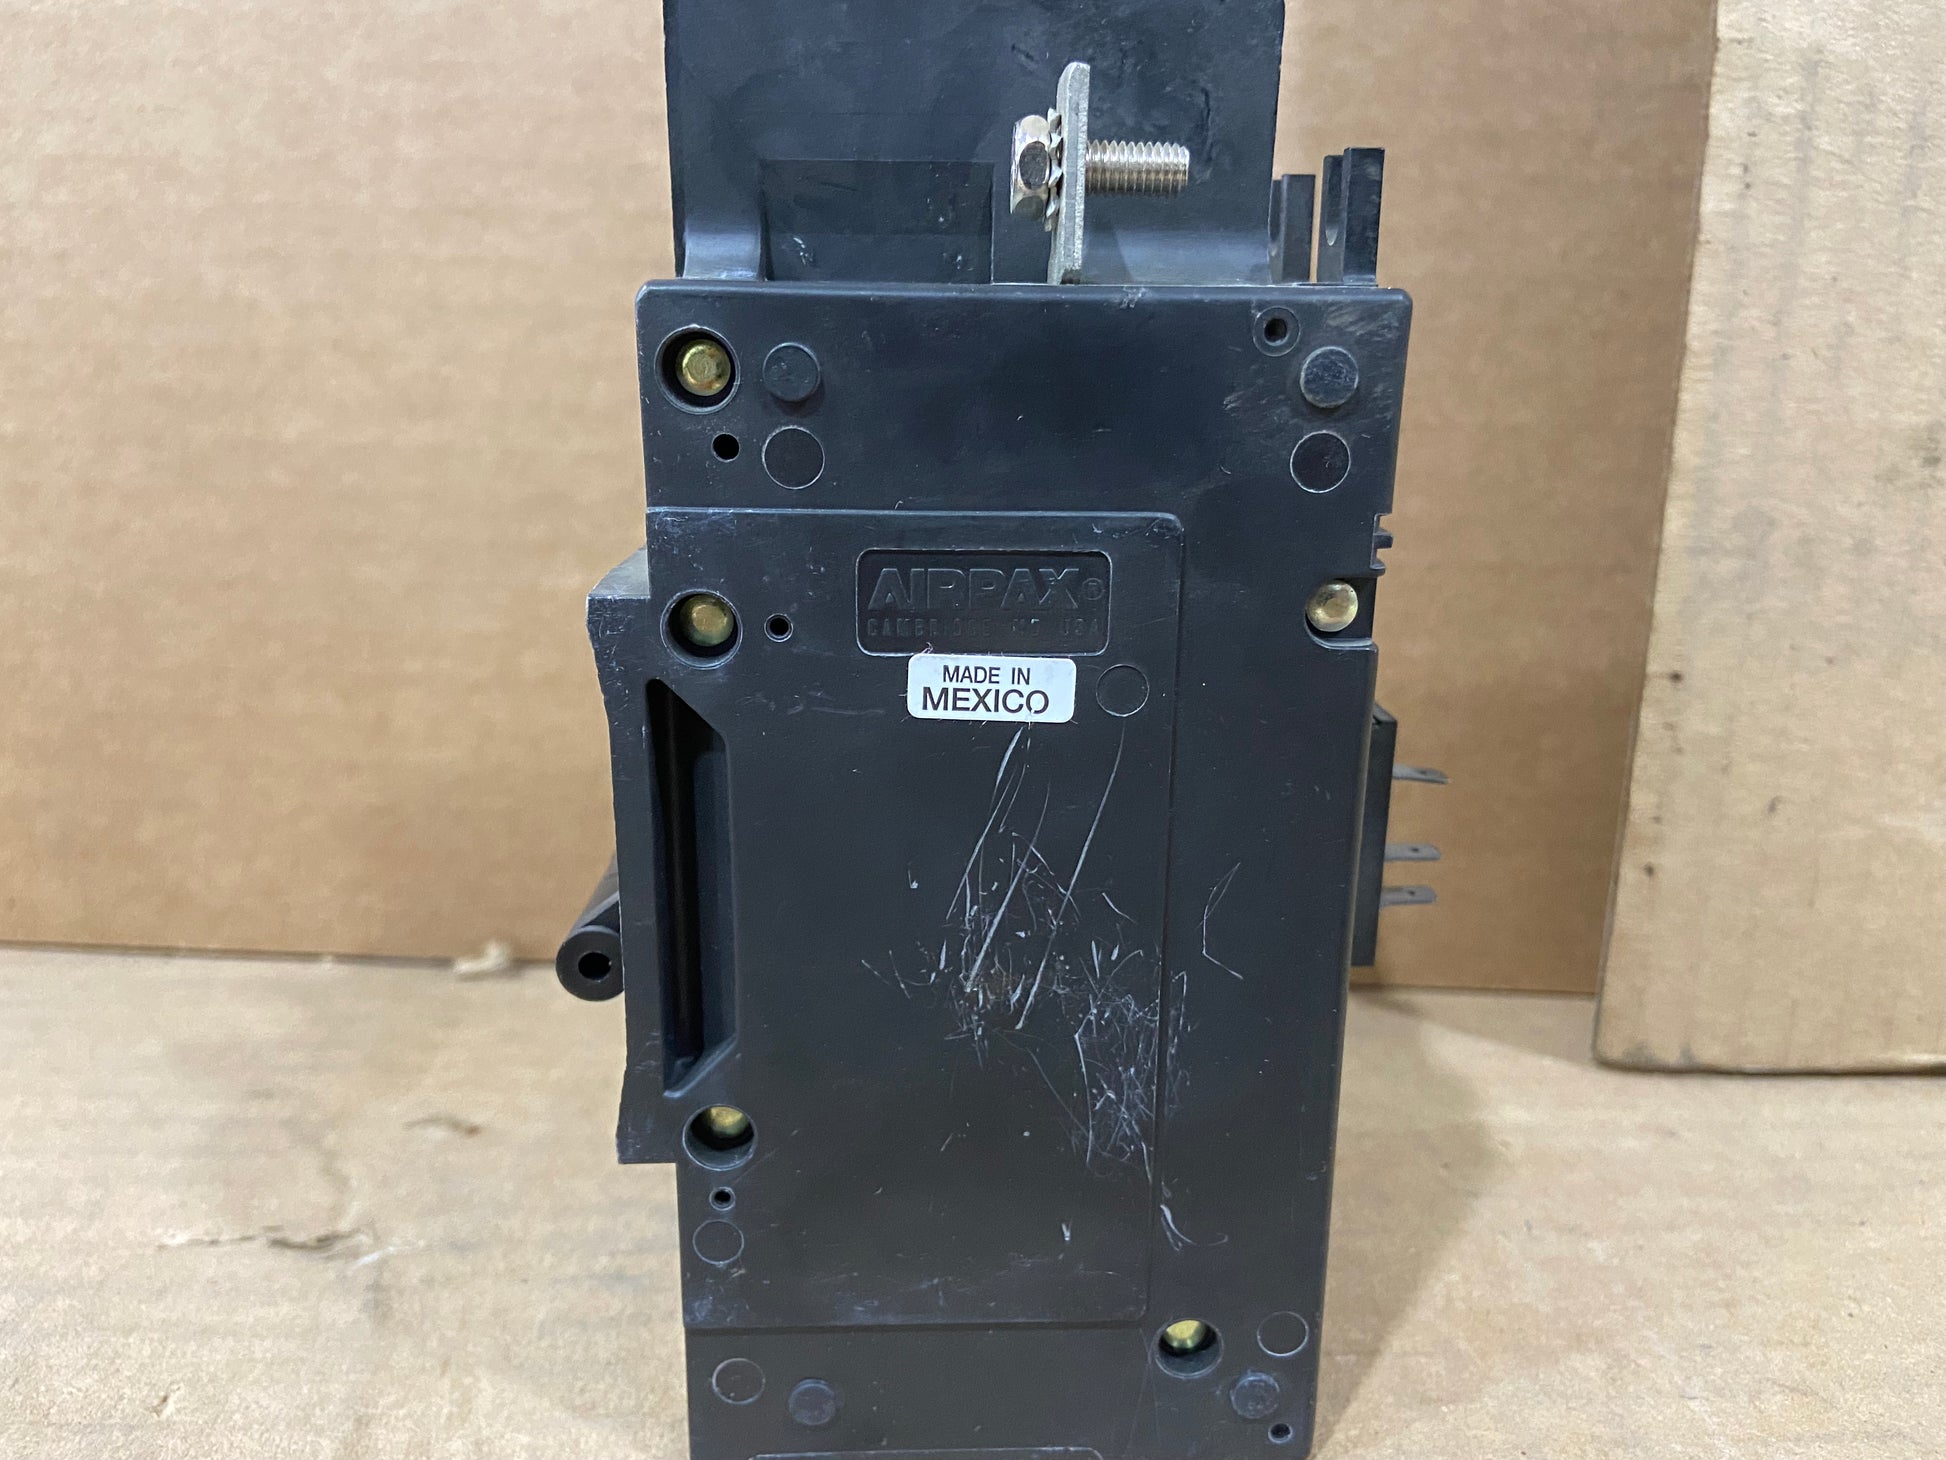 3 POLE 25.8 AMP "219 MULTI-POLE" SERIES HYDRAULIC MAGNETIC CIRCUIT BREAKER PROTECTOR/FOR MANUAL MOTOR CONTROLLER APPLICATIONS 480/50-60/1 OR 3